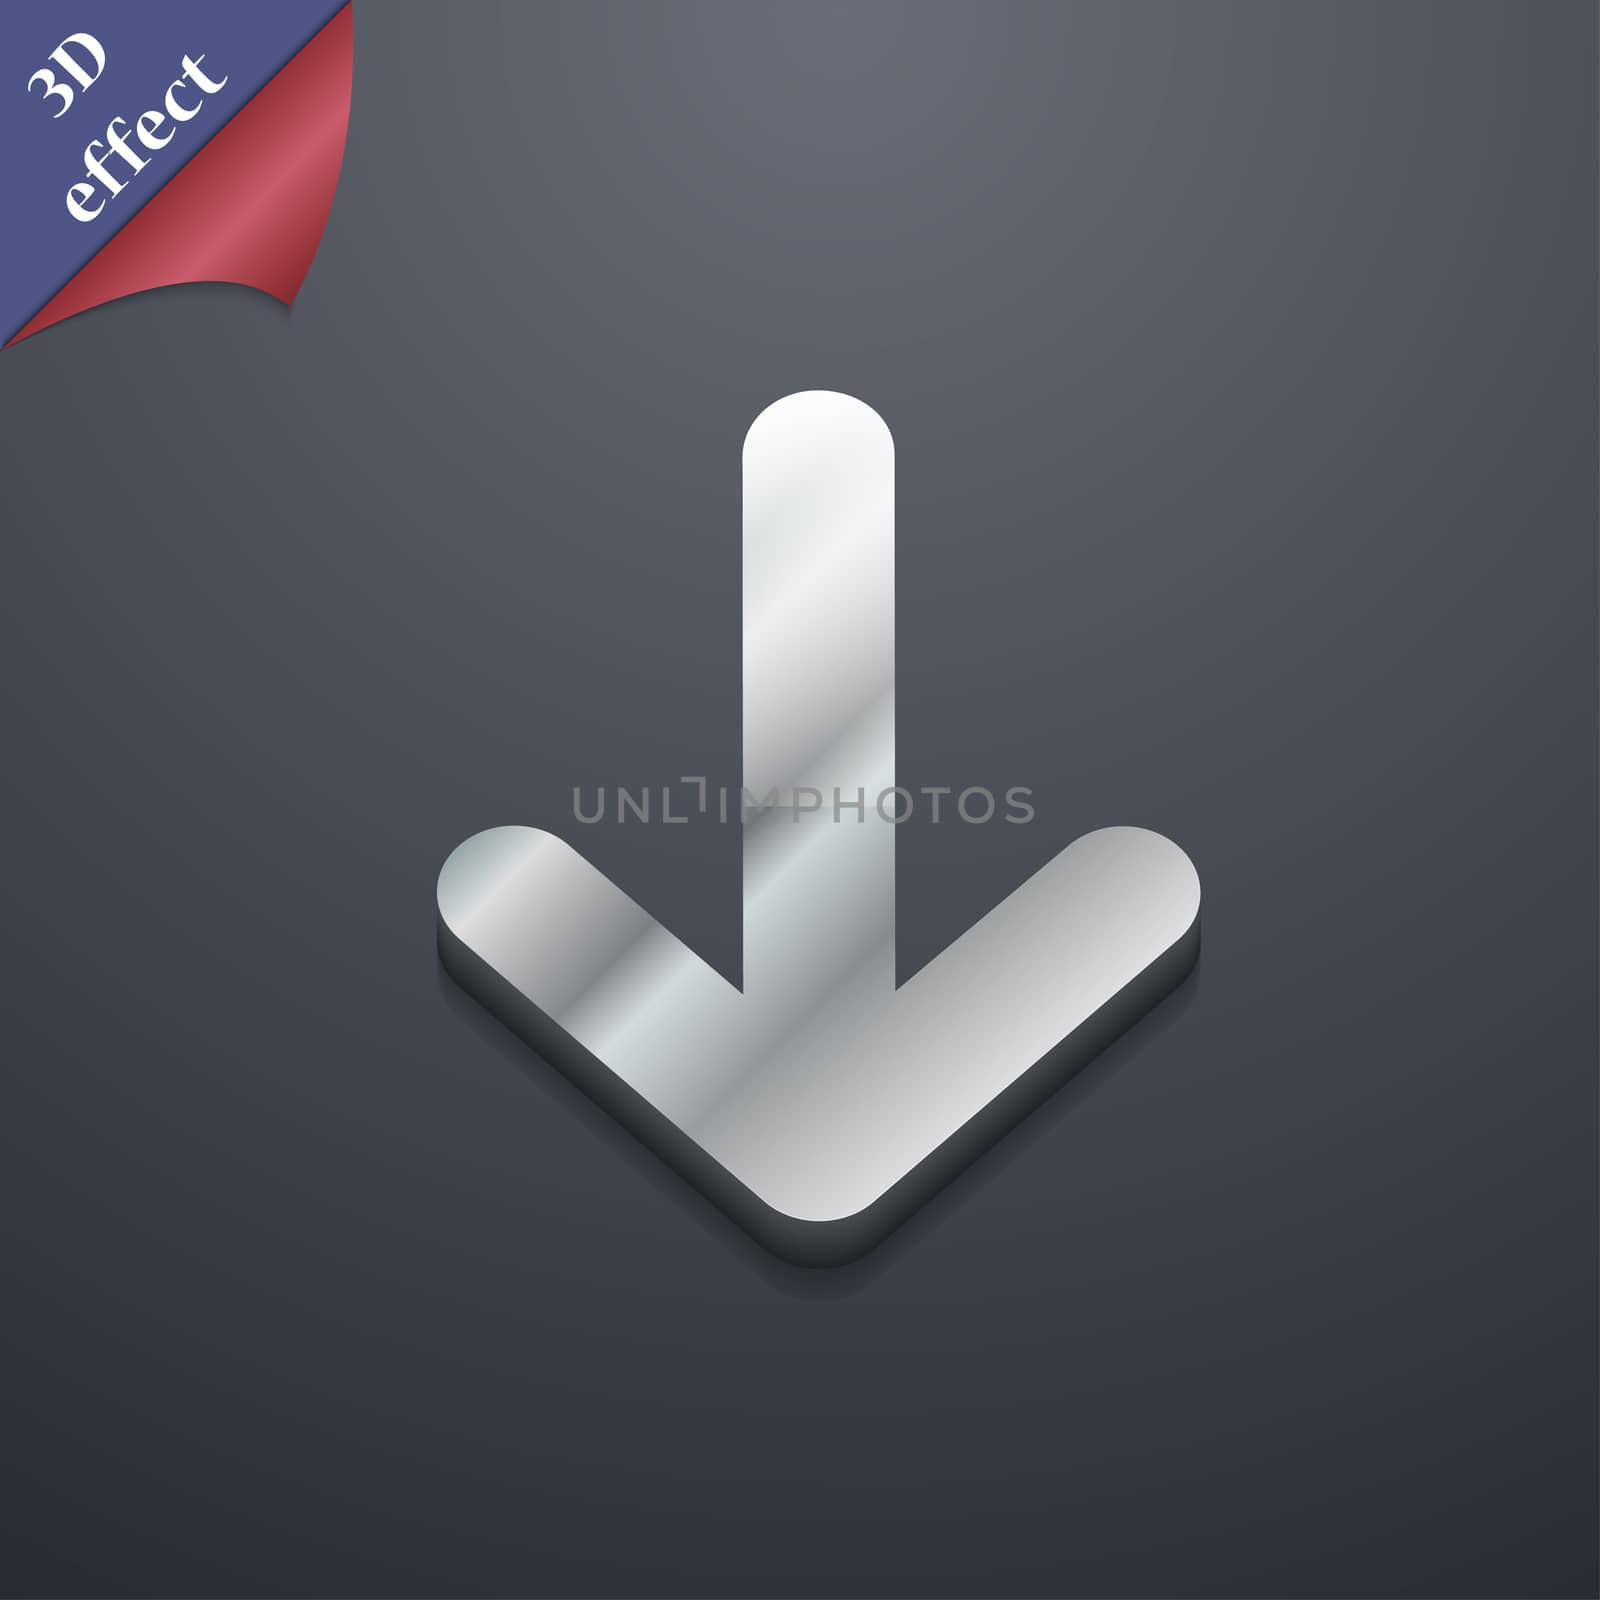 Arrow down, Download, Load, Backup icon symbol. 3D style. Trendy, modern design with space for your text illustration. Rastrized copy